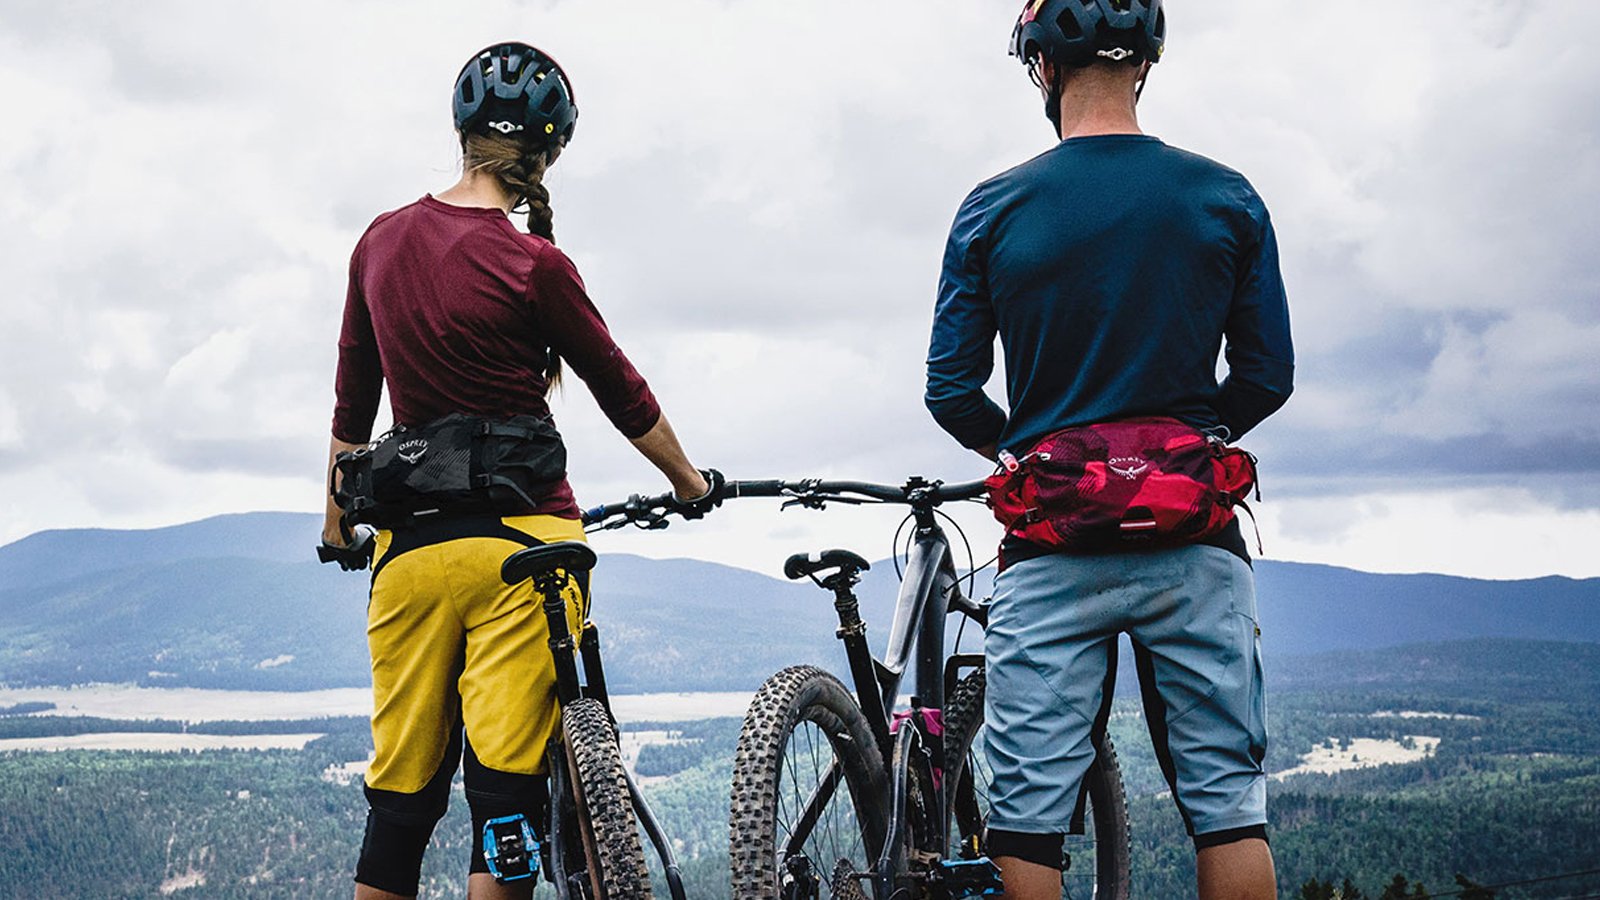 MTB hip packs – ditch the bag and travel light on the trails